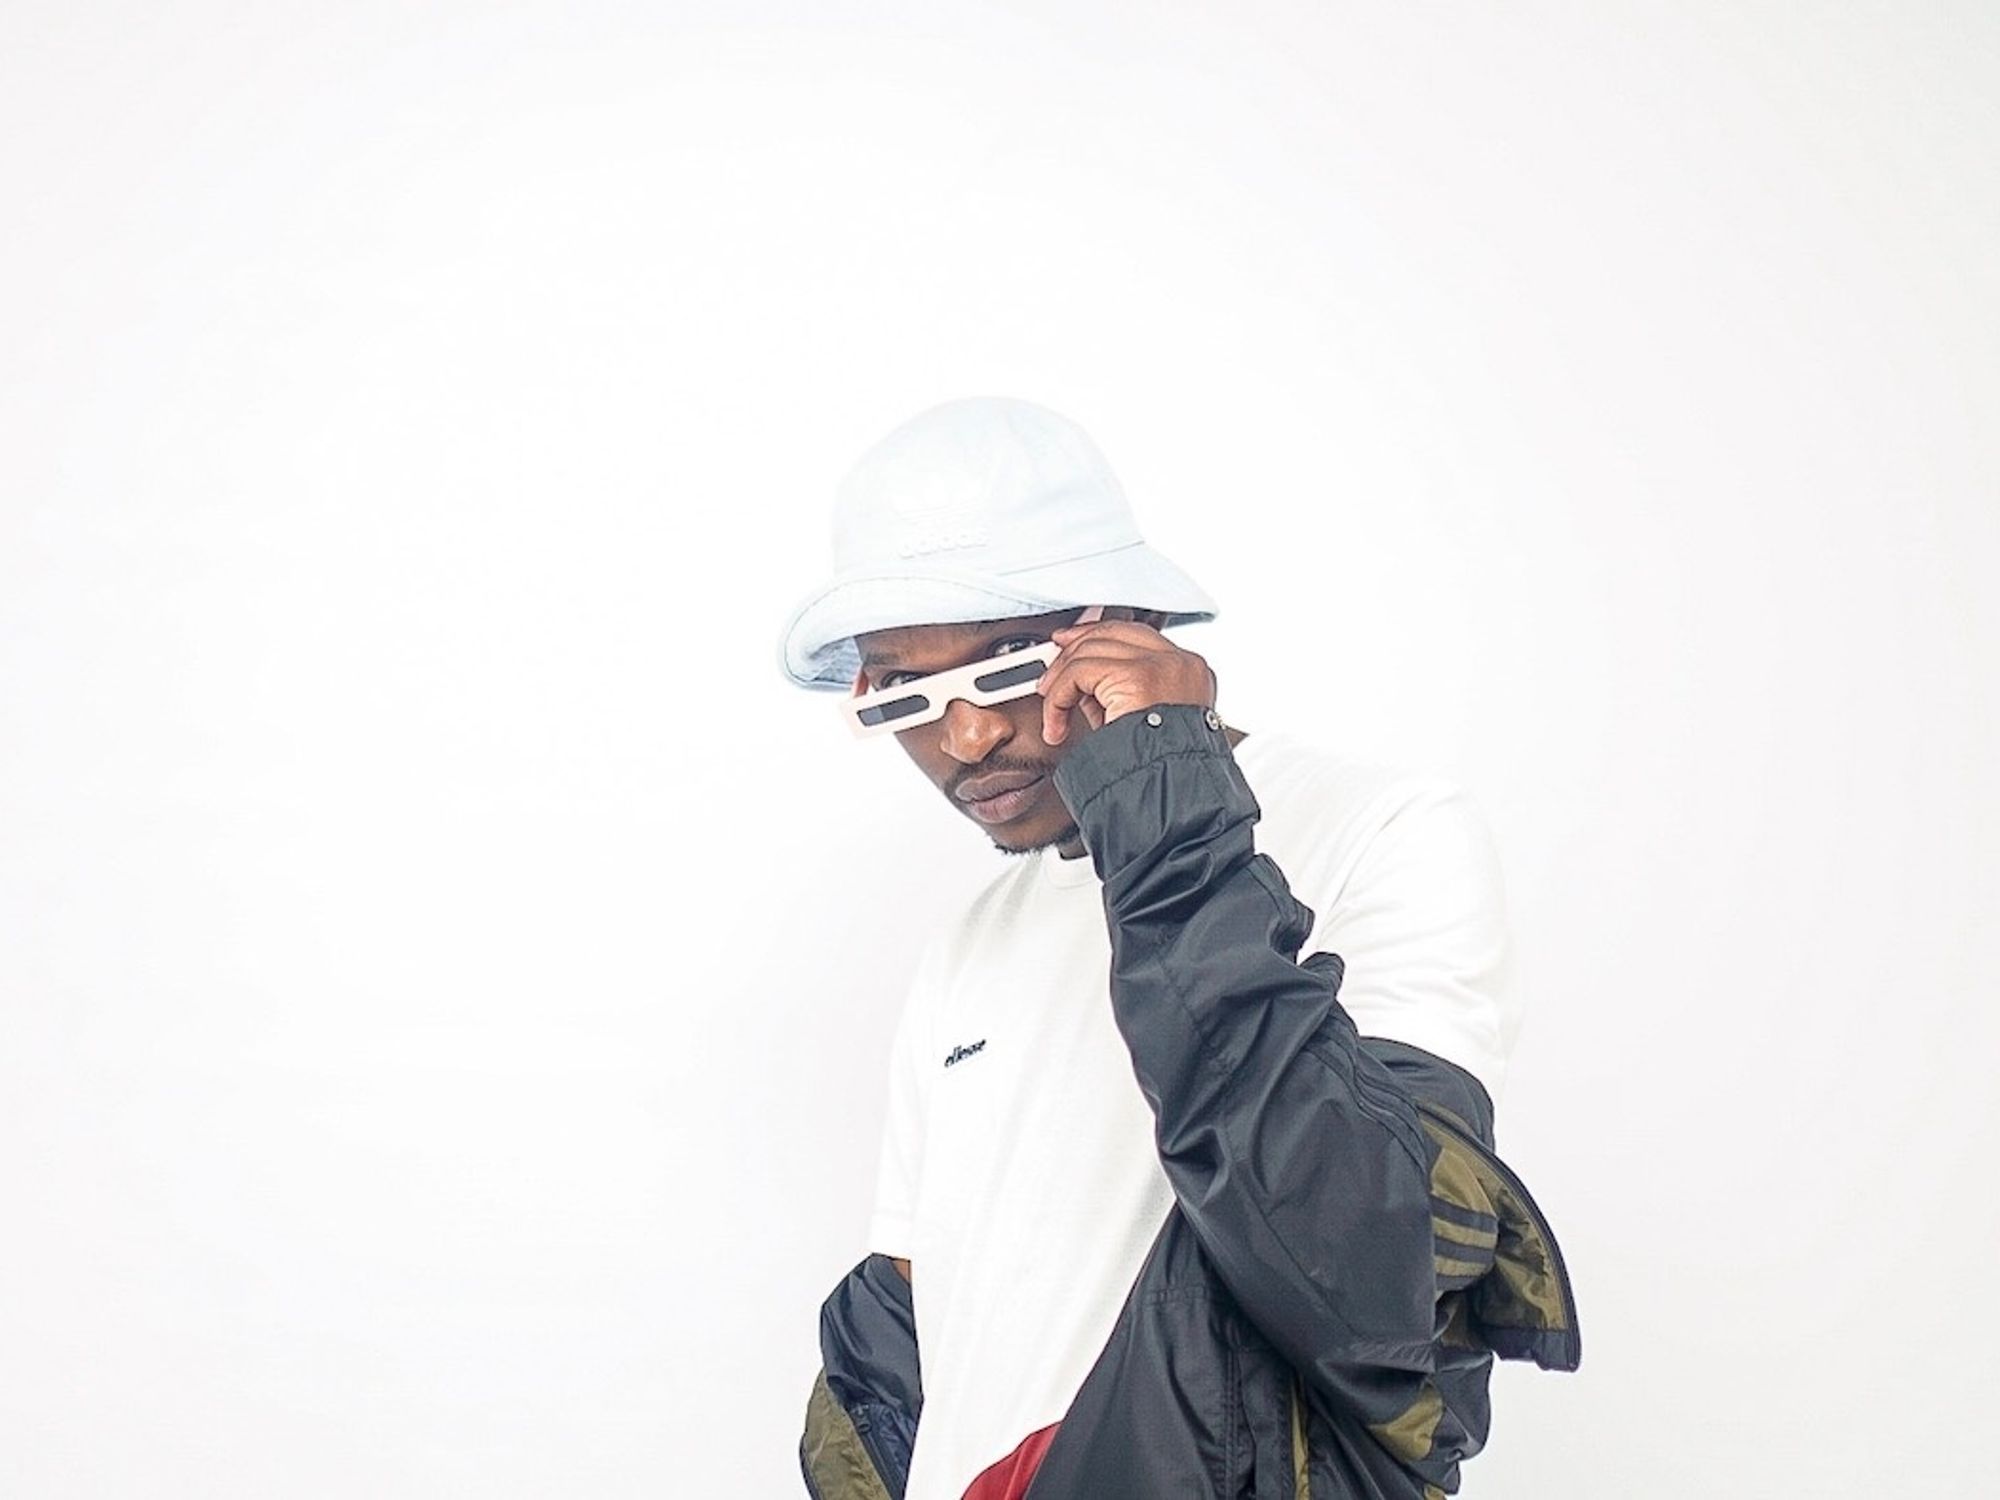 808x poses in front of a white backdrop. 